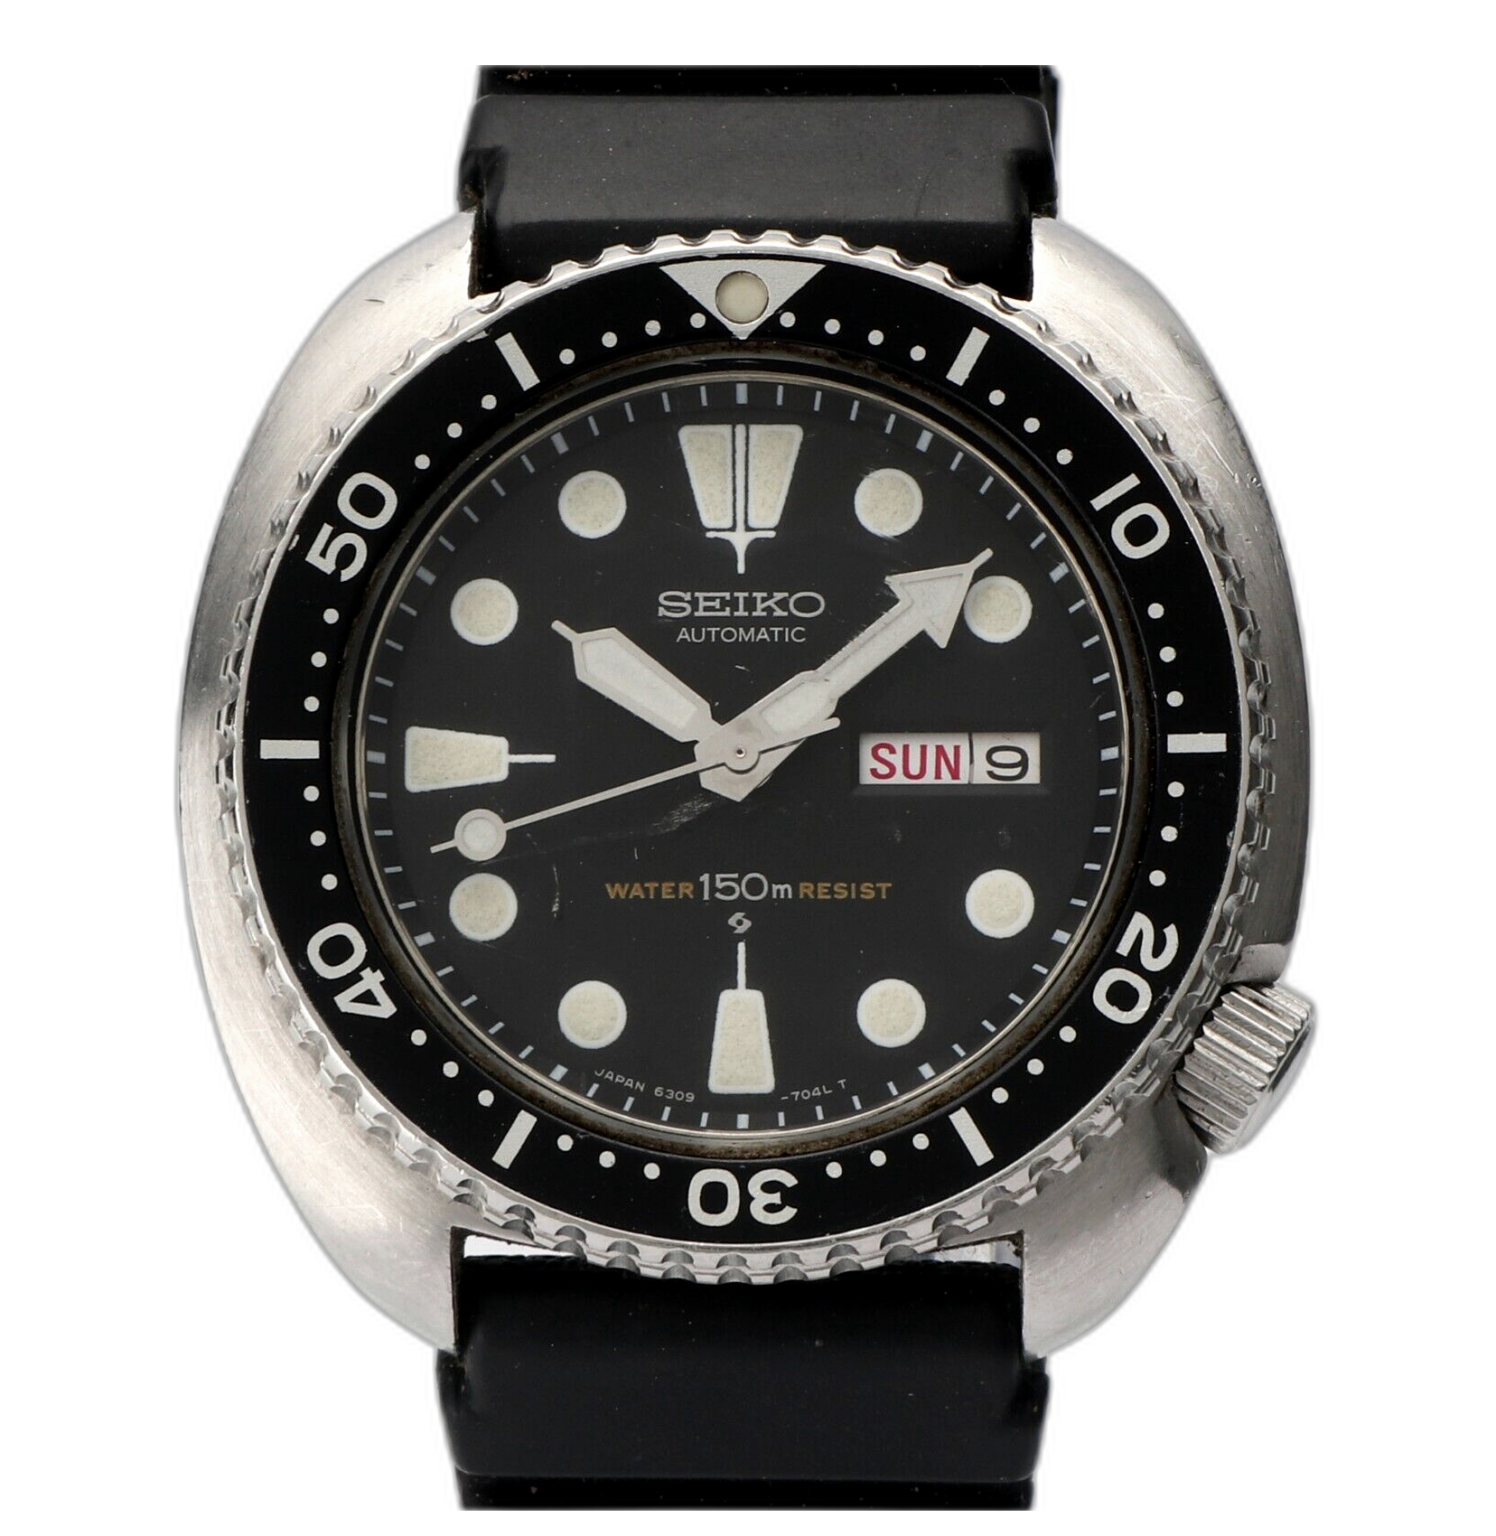 Seiko 6309-7040/7049: The CHiPs watch – Iconic Hours